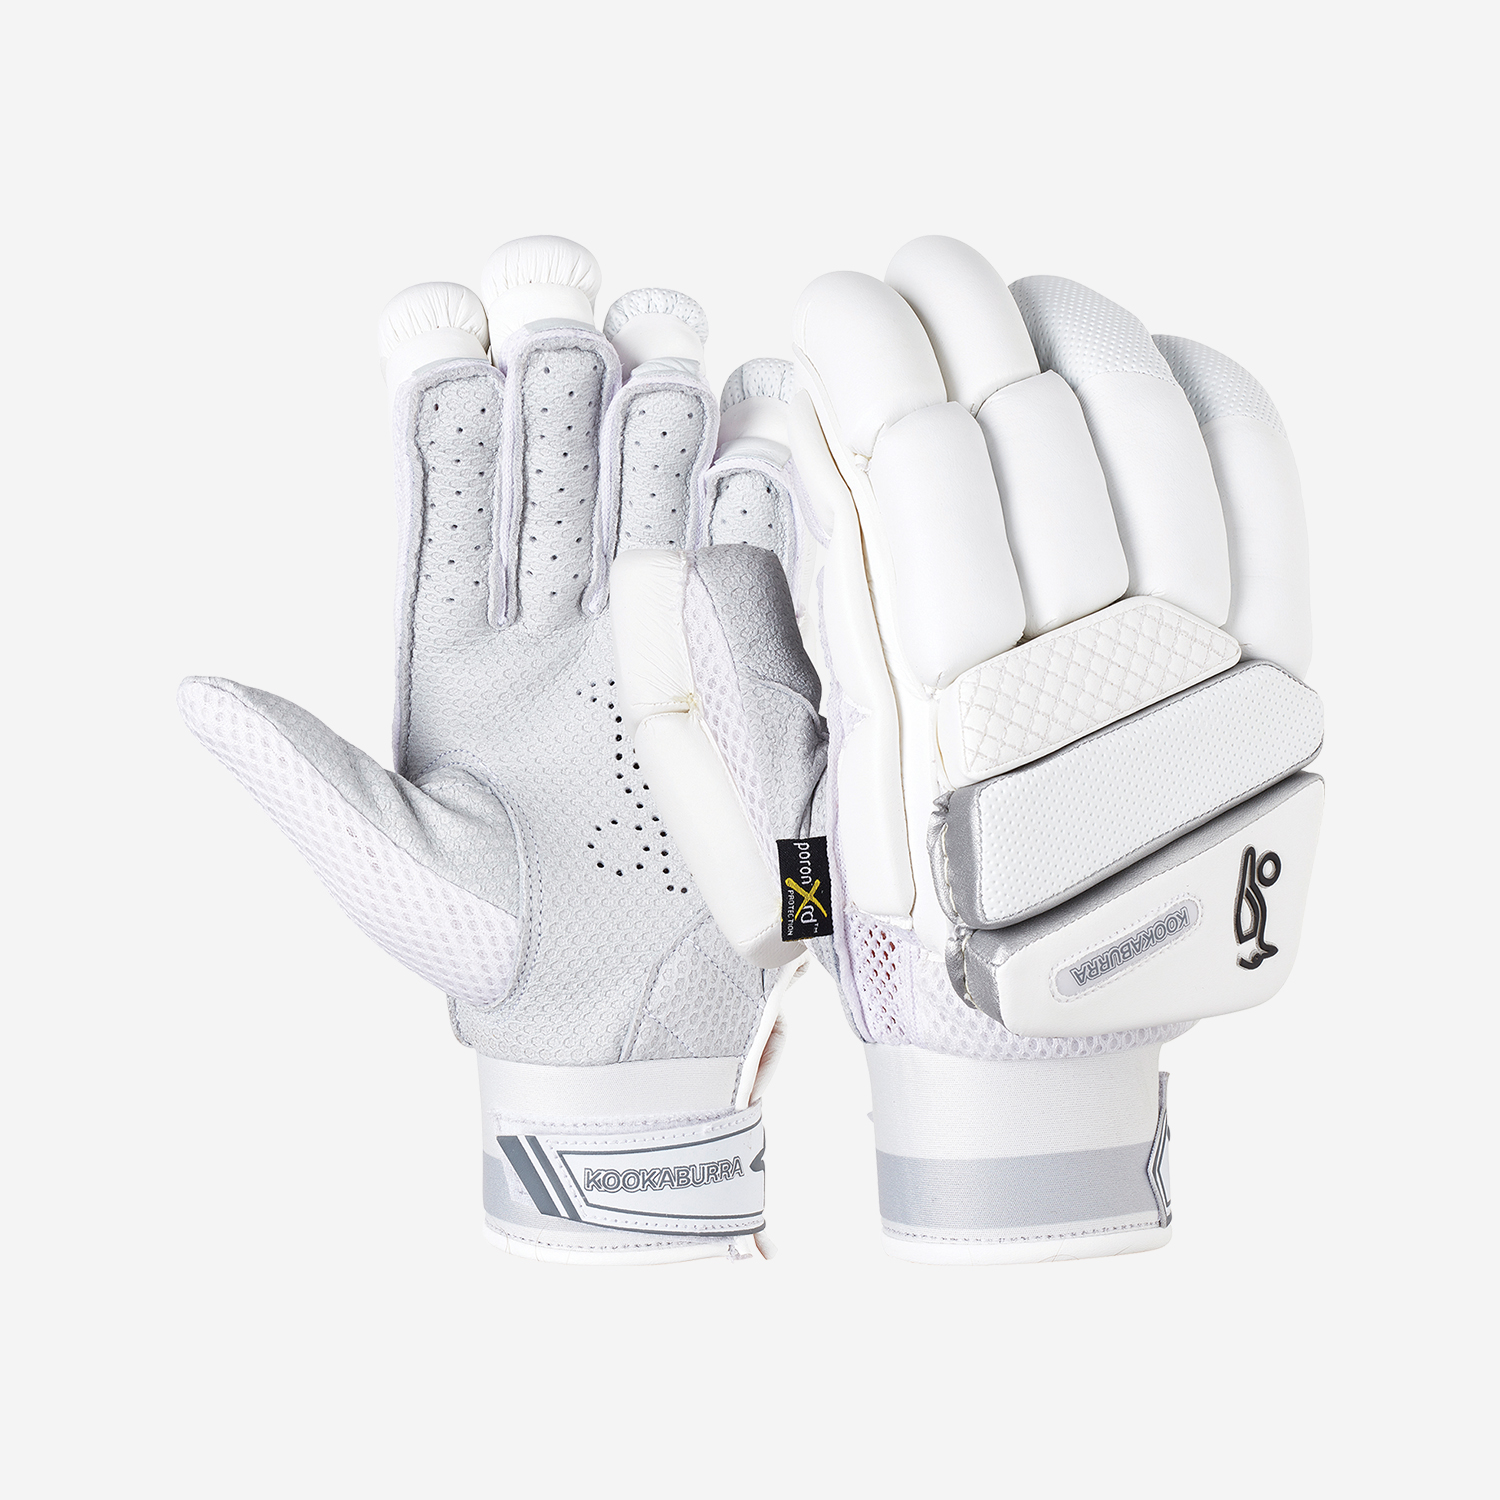 KOOKABURRA Unisexs 2020 Ghost Pro Batting Gloves Small Adult Right Hand White 